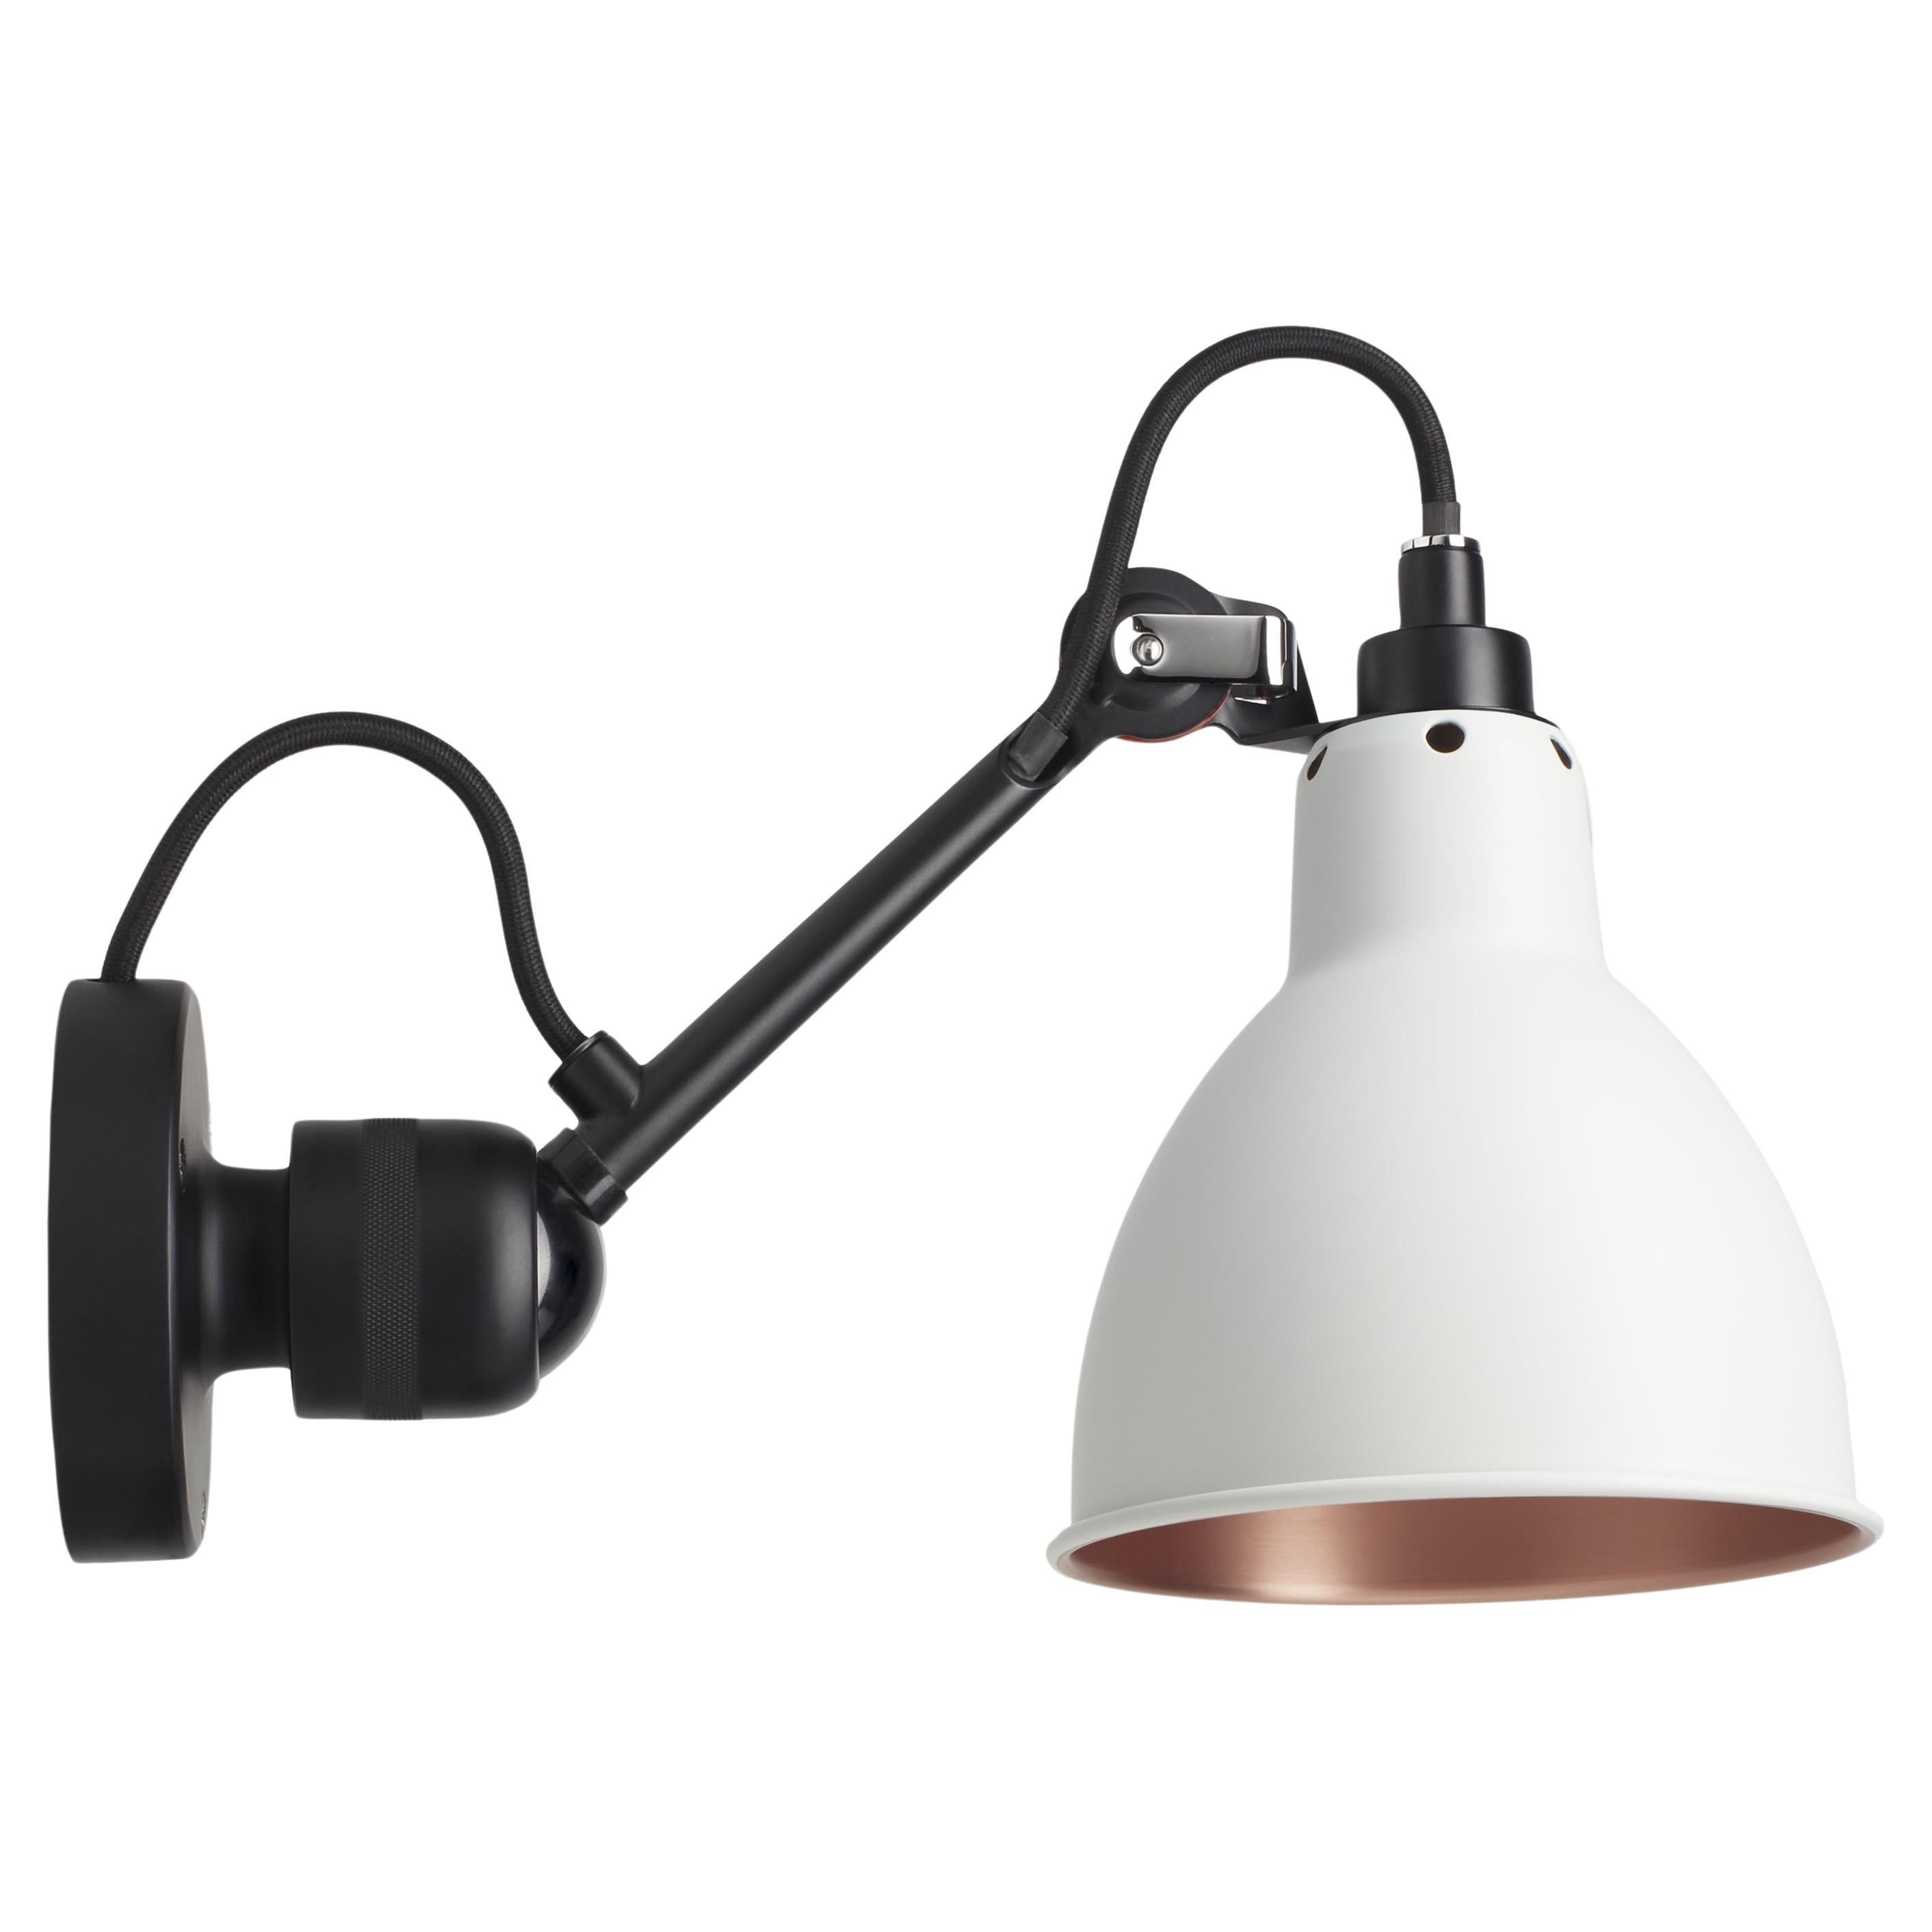 DCW Editions La Lampe Gras N°304 Wall Lamp in Black Arm and White Copper Shade For Sale